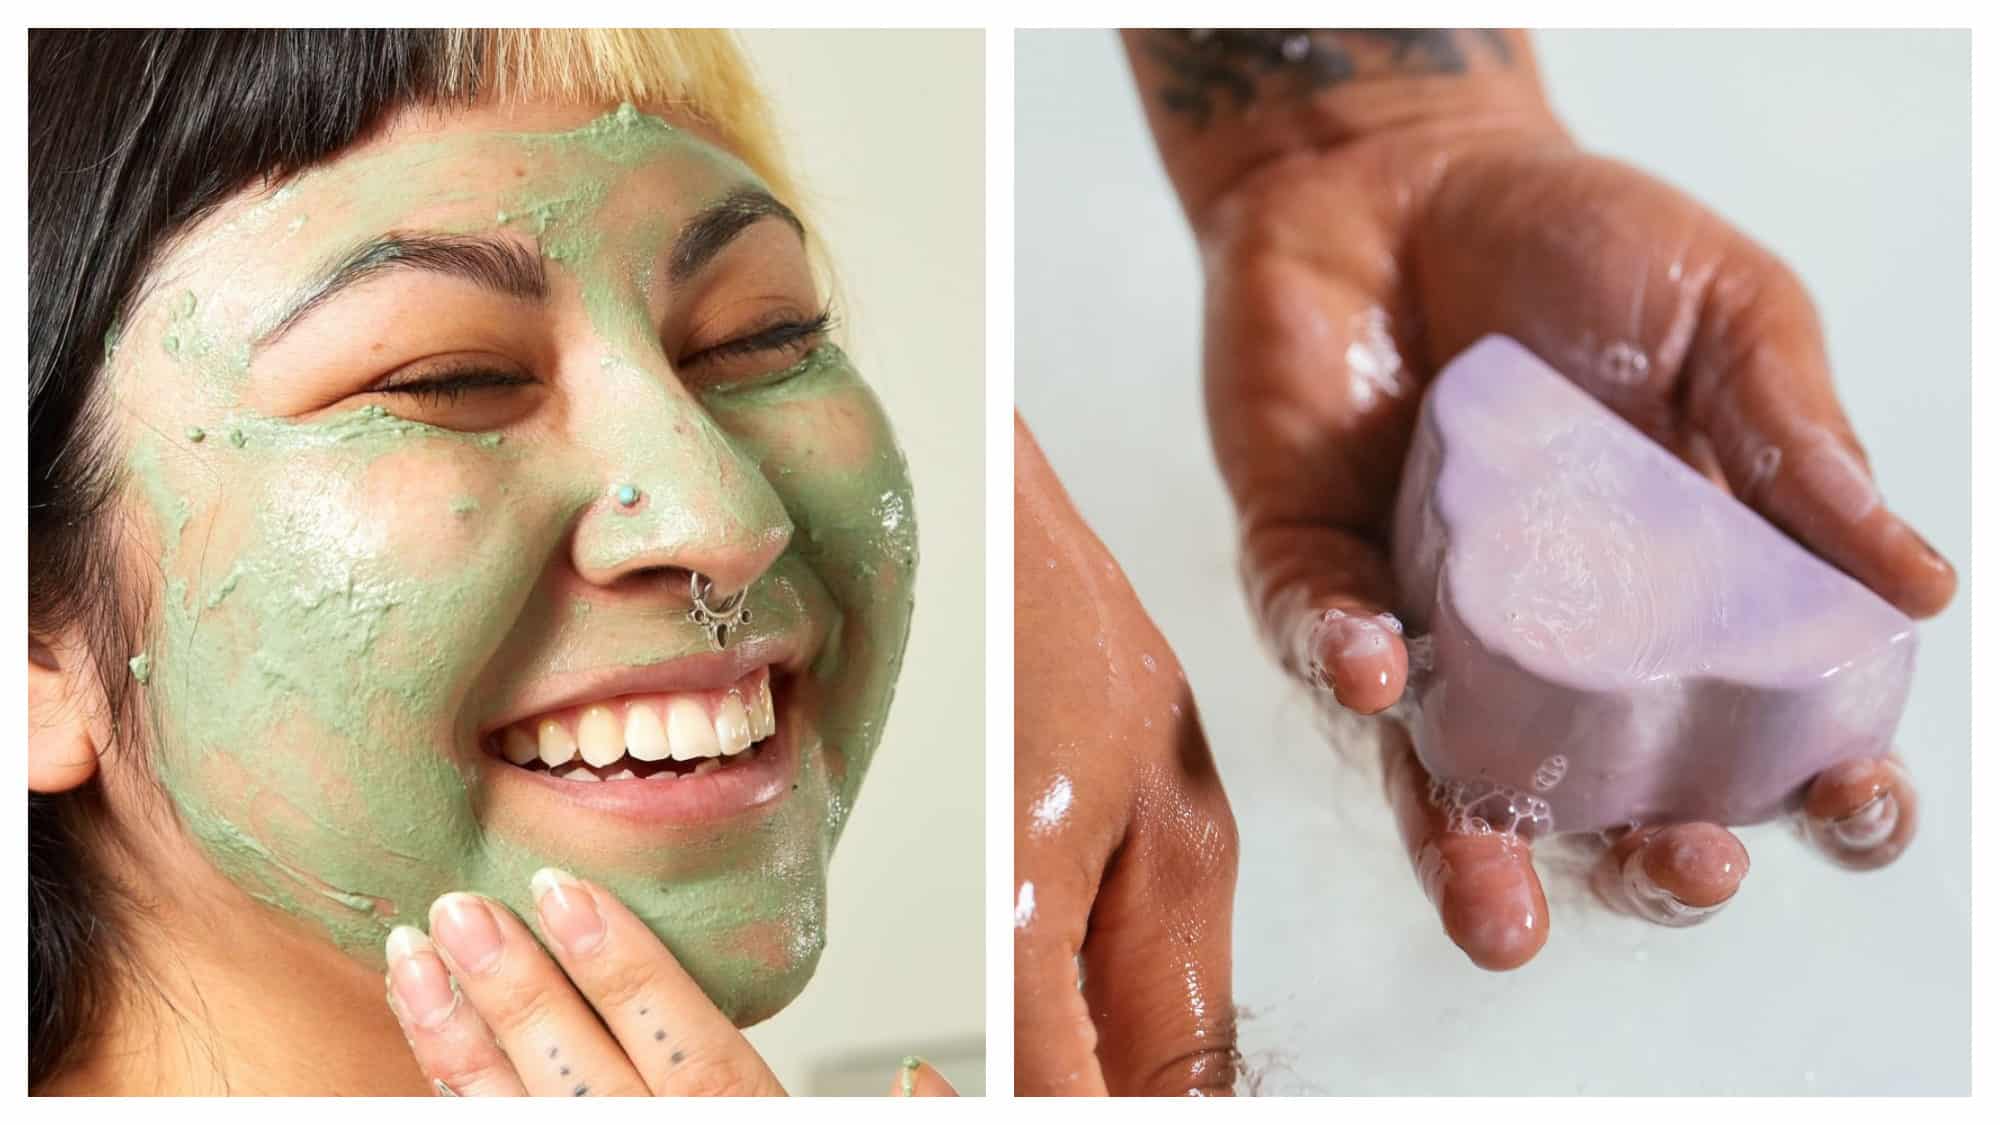 A Lush face mask applied to an Asian woman's smiling face with pearcings (left). A man holding a bar of pink Lush soap (right). 